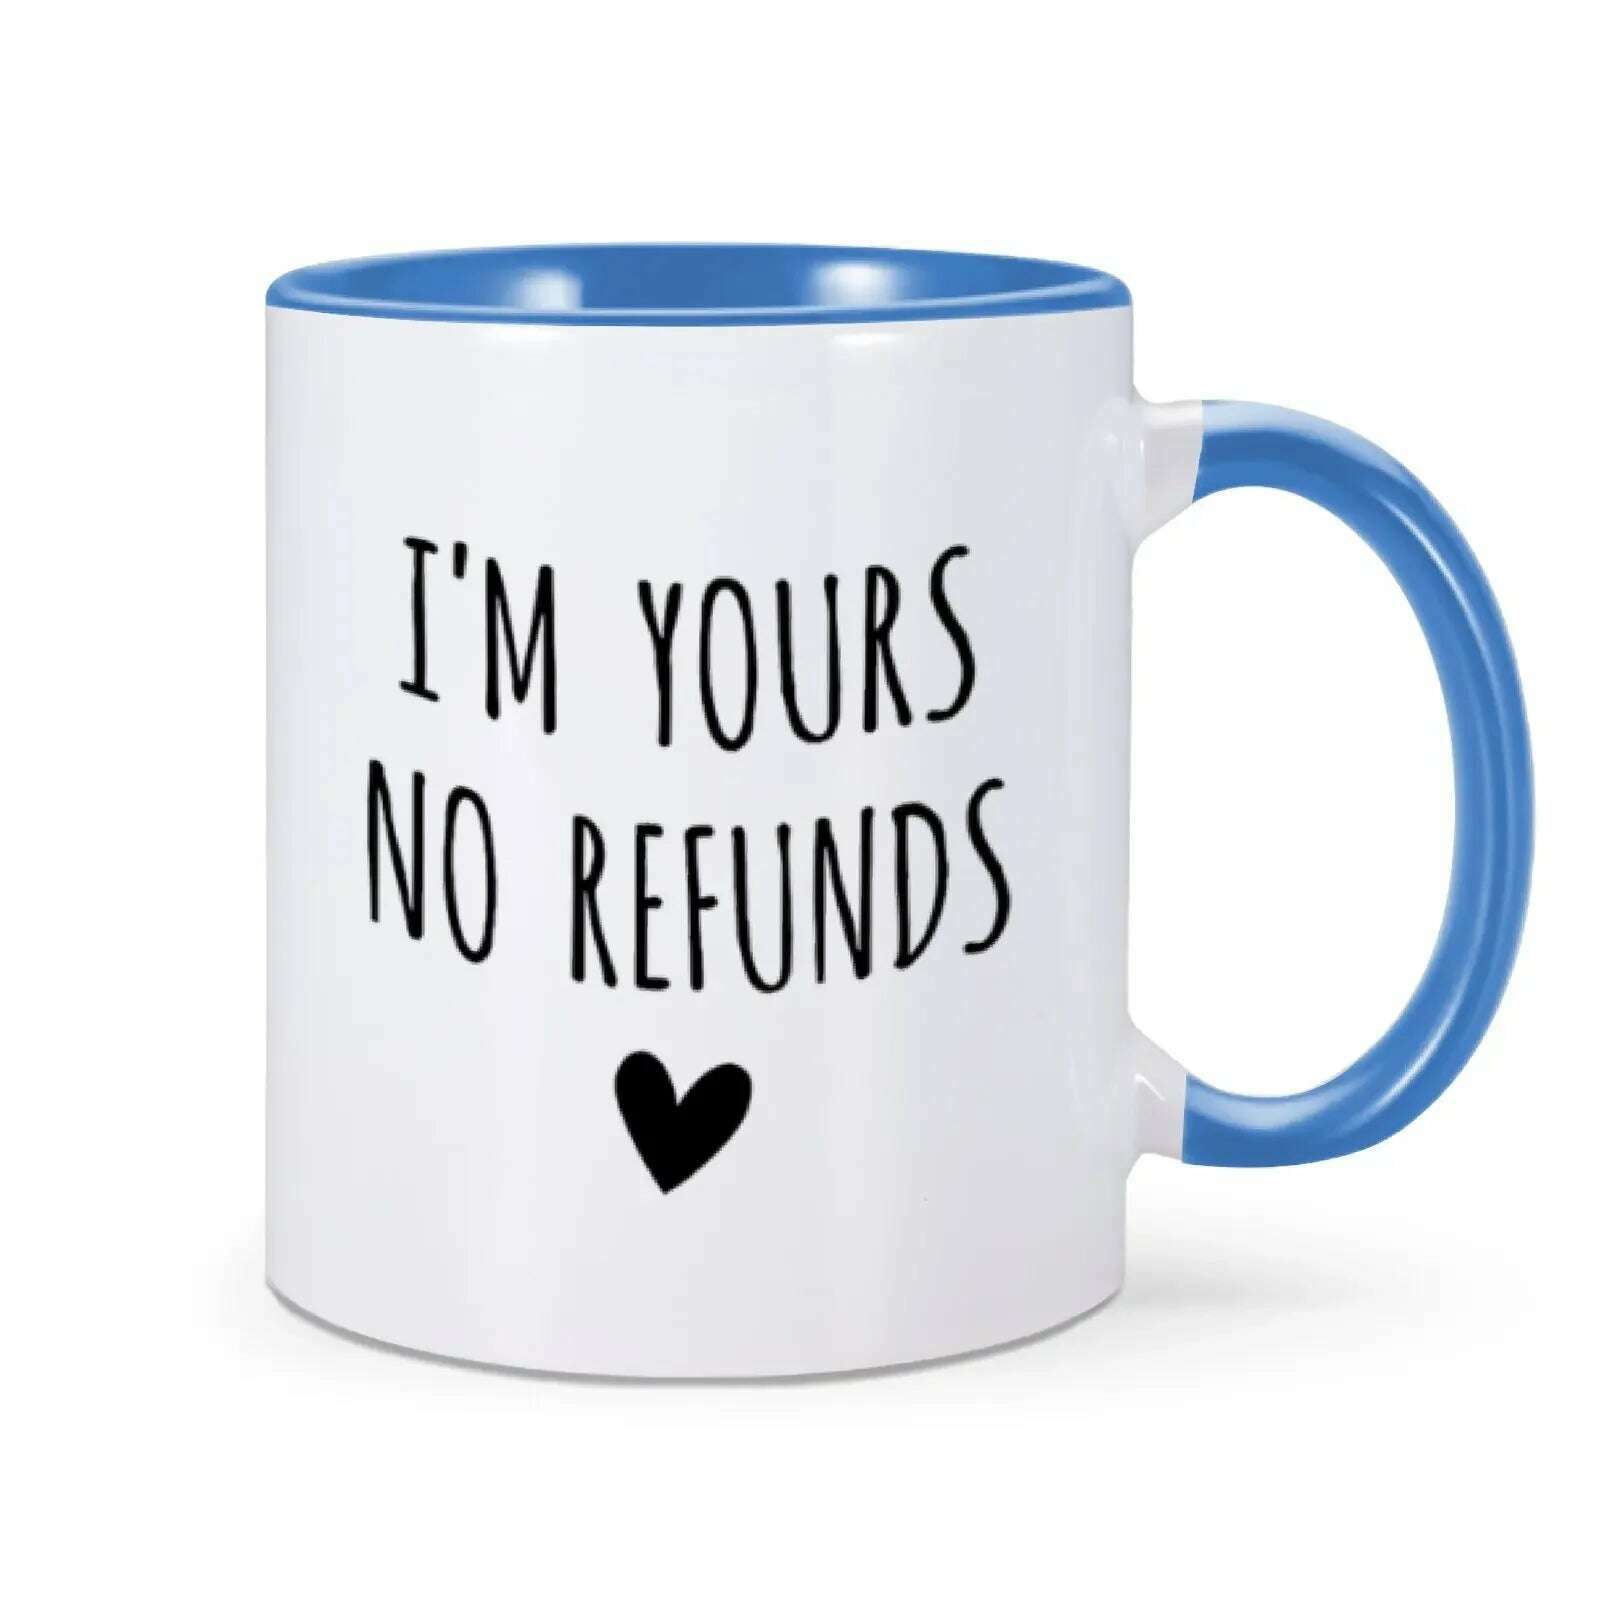 KIMLUD, I'm Yours No Refunds Mug Valentine's Day Mug Valentines Gift for Him Her Husband Wife Funny Coffee Cup for Women Men 11 Oz Mug, Blue / 11oz, KIMLUD Womens Clothes